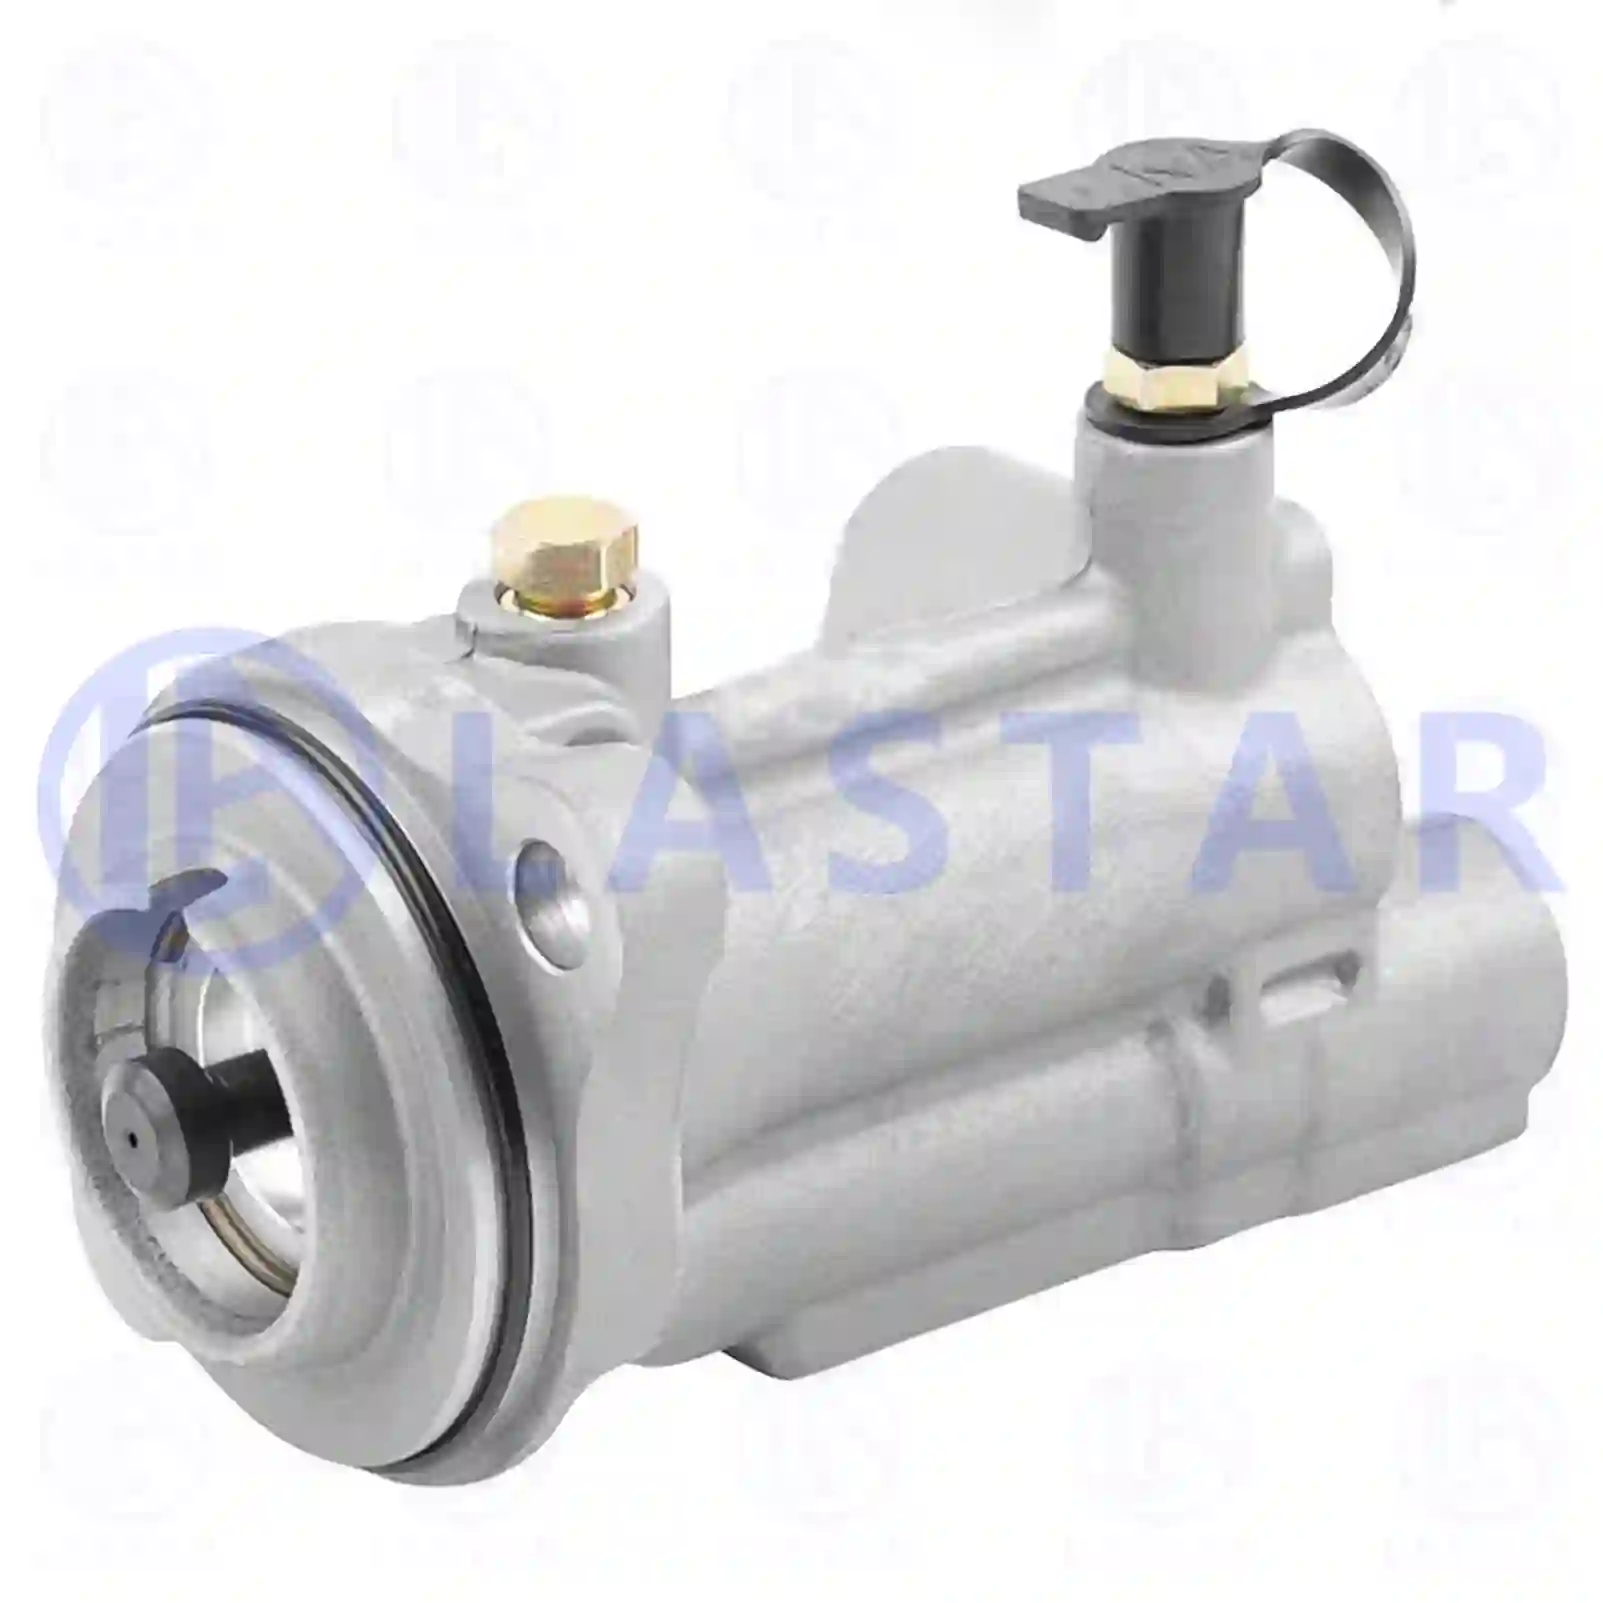 Shifting cylinder, 77732802, 0012608863, ZG30600-0008 ||  77732802 Lastar Spare Part | Truck Spare Parts, Auotomotive Spare Parts Shifting cylinder, 77732802, 0012608863, ZG30600-0008 ||  77732802 Lastar Spare Part | Truck Spare Parts, Auotomotive Spare Parts